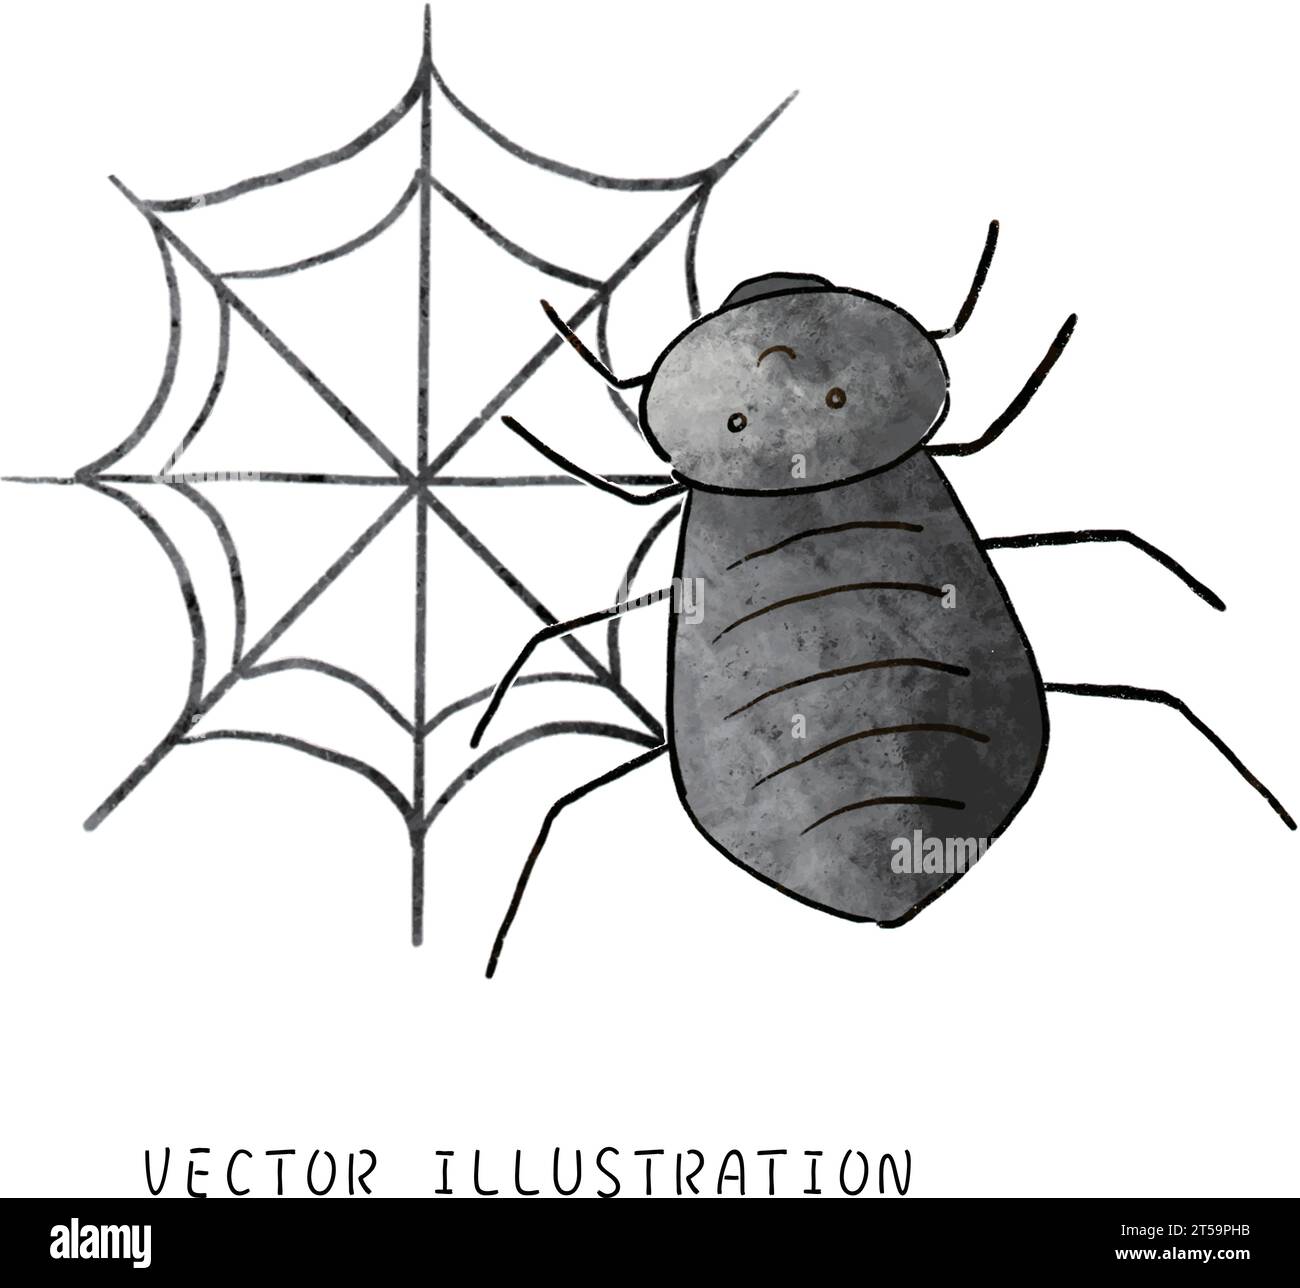 Cute Halloween Spider Clinging to a Spiderweb in Watercolor Style Festive October Illustration Stock Vector